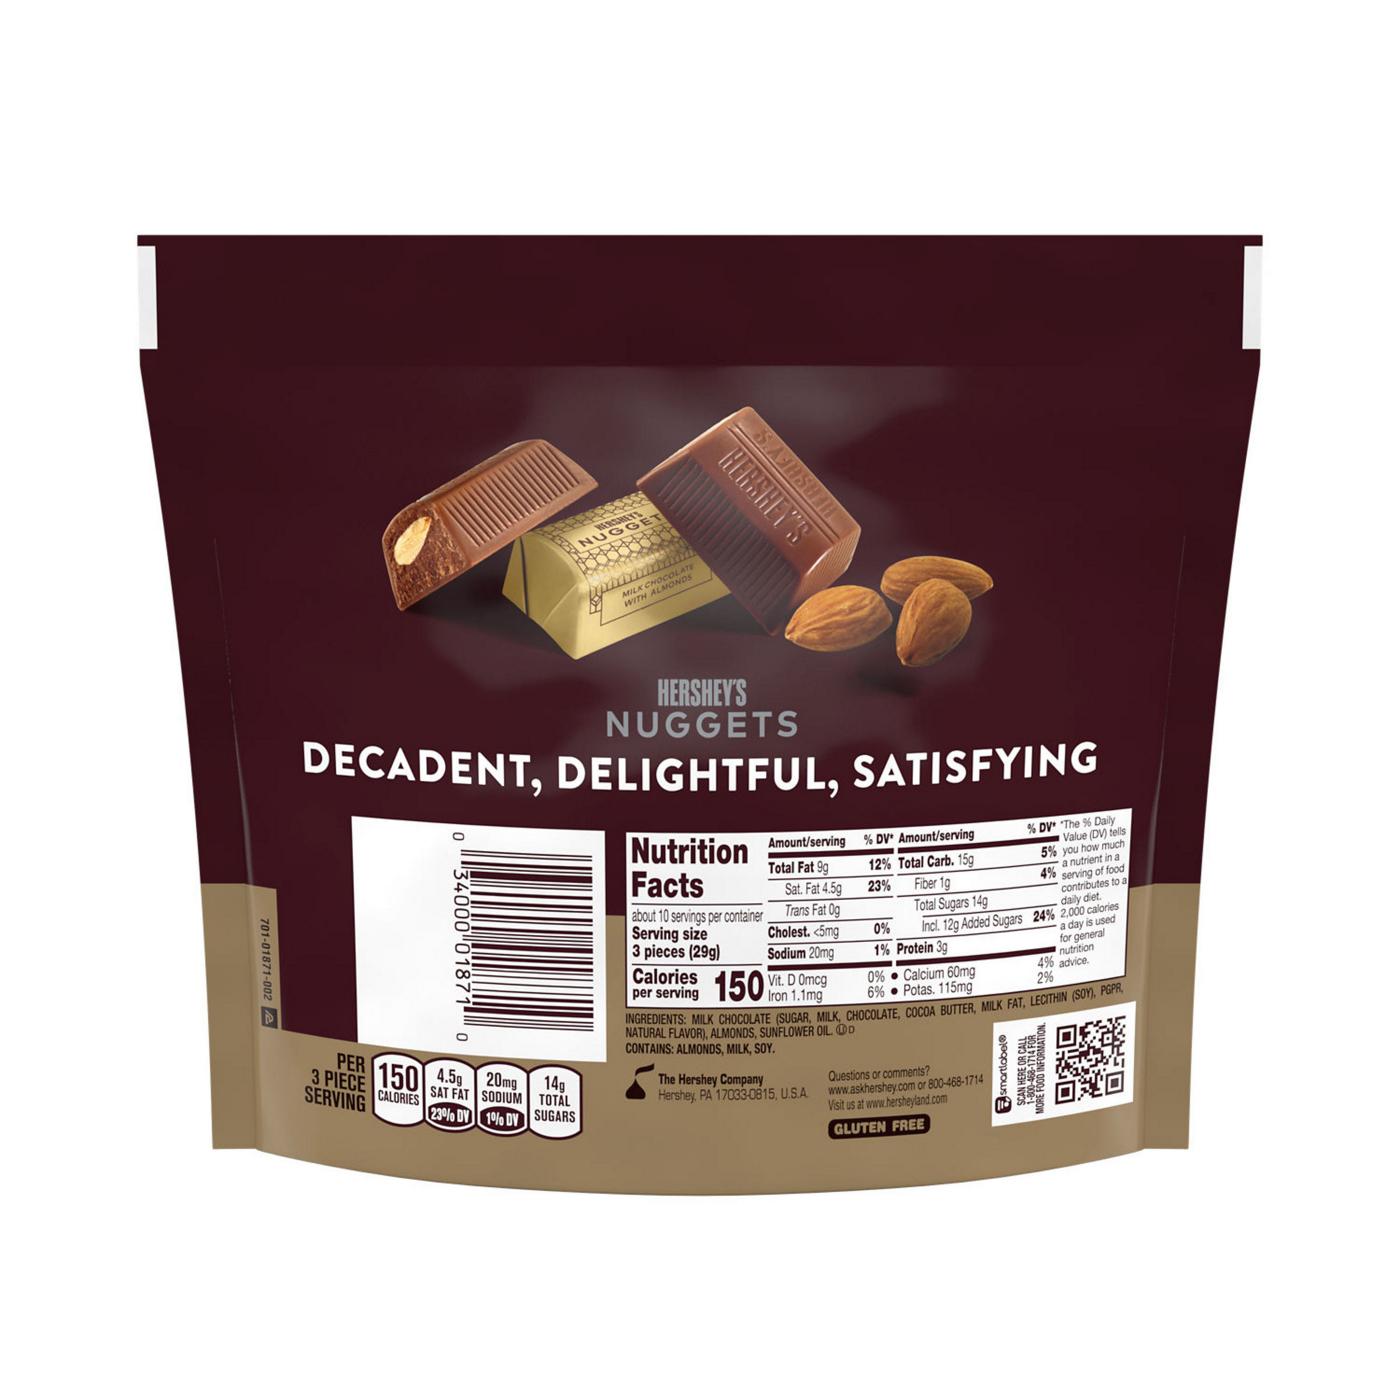 Hershey's Nuggets Milk Chocolate with Almonds Candy - Share Pack; image 7 of 7